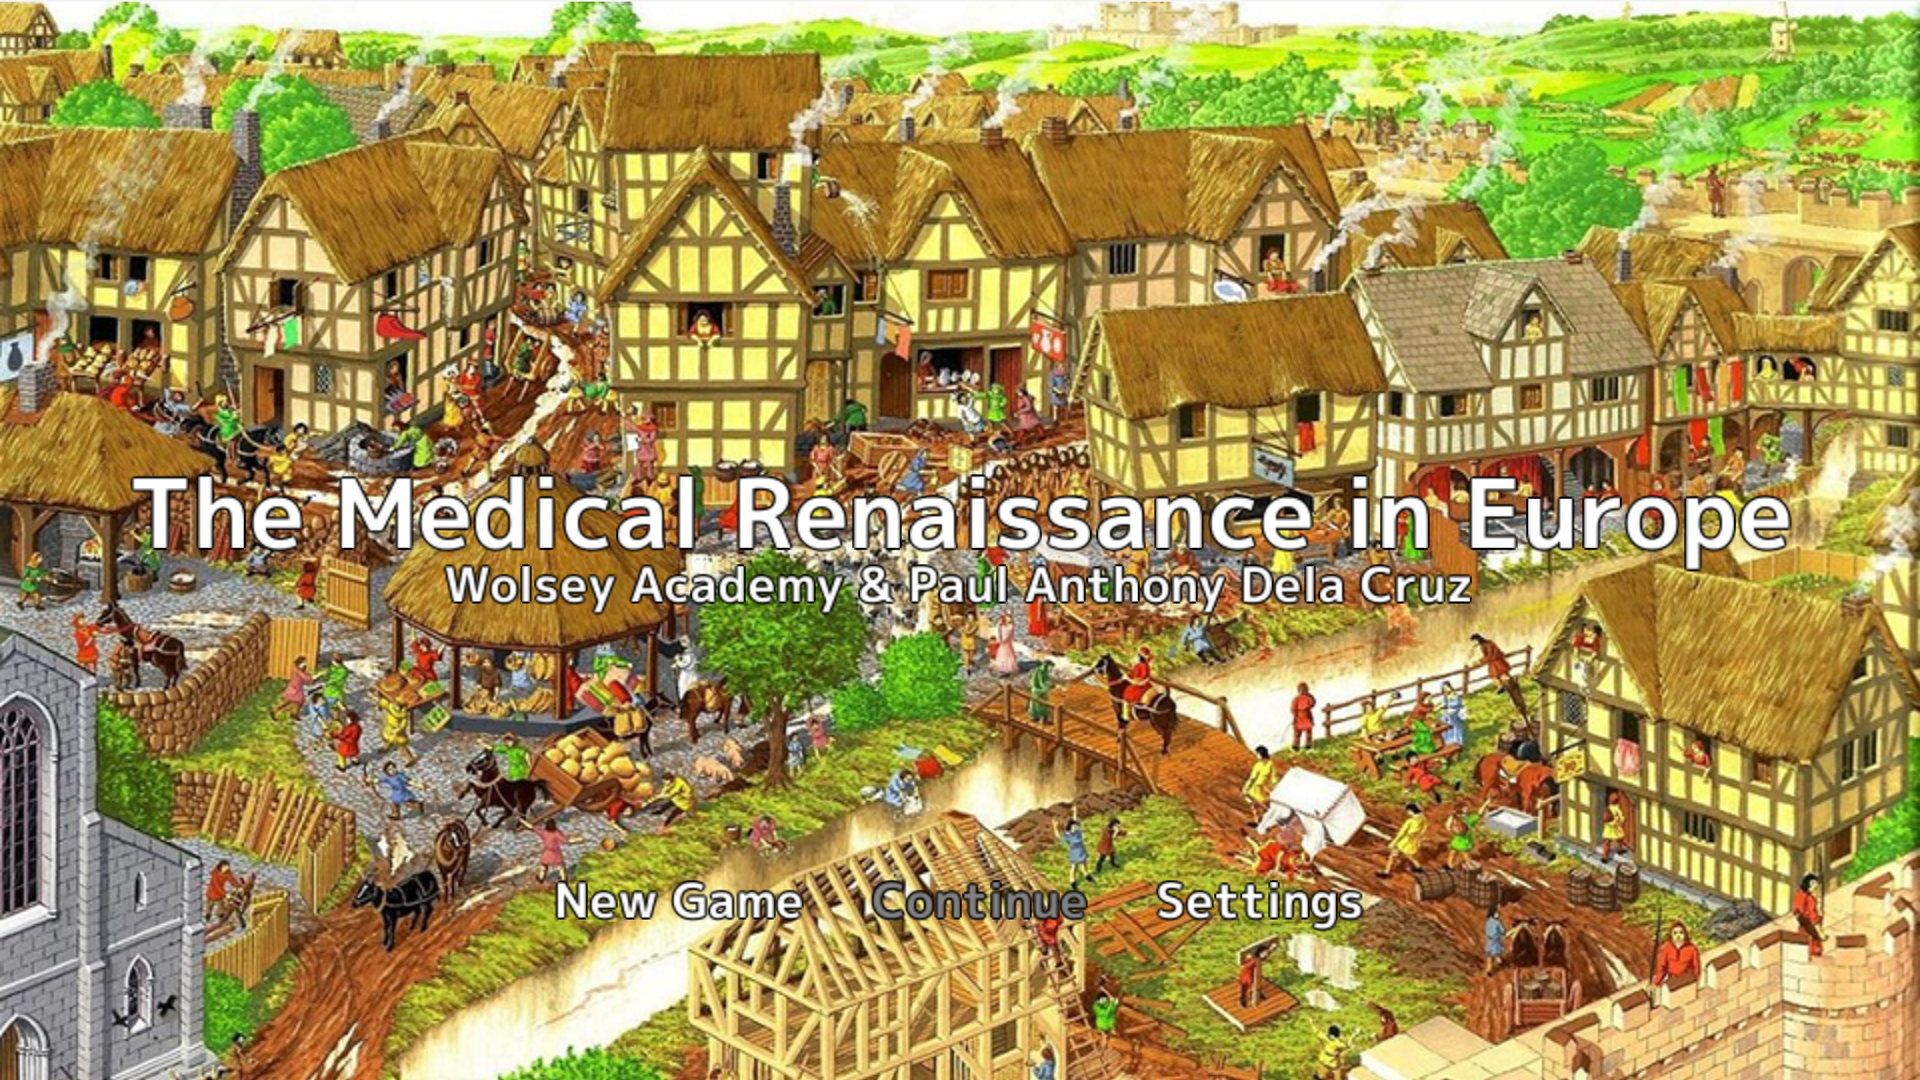 The Medical Renaissance in Europe